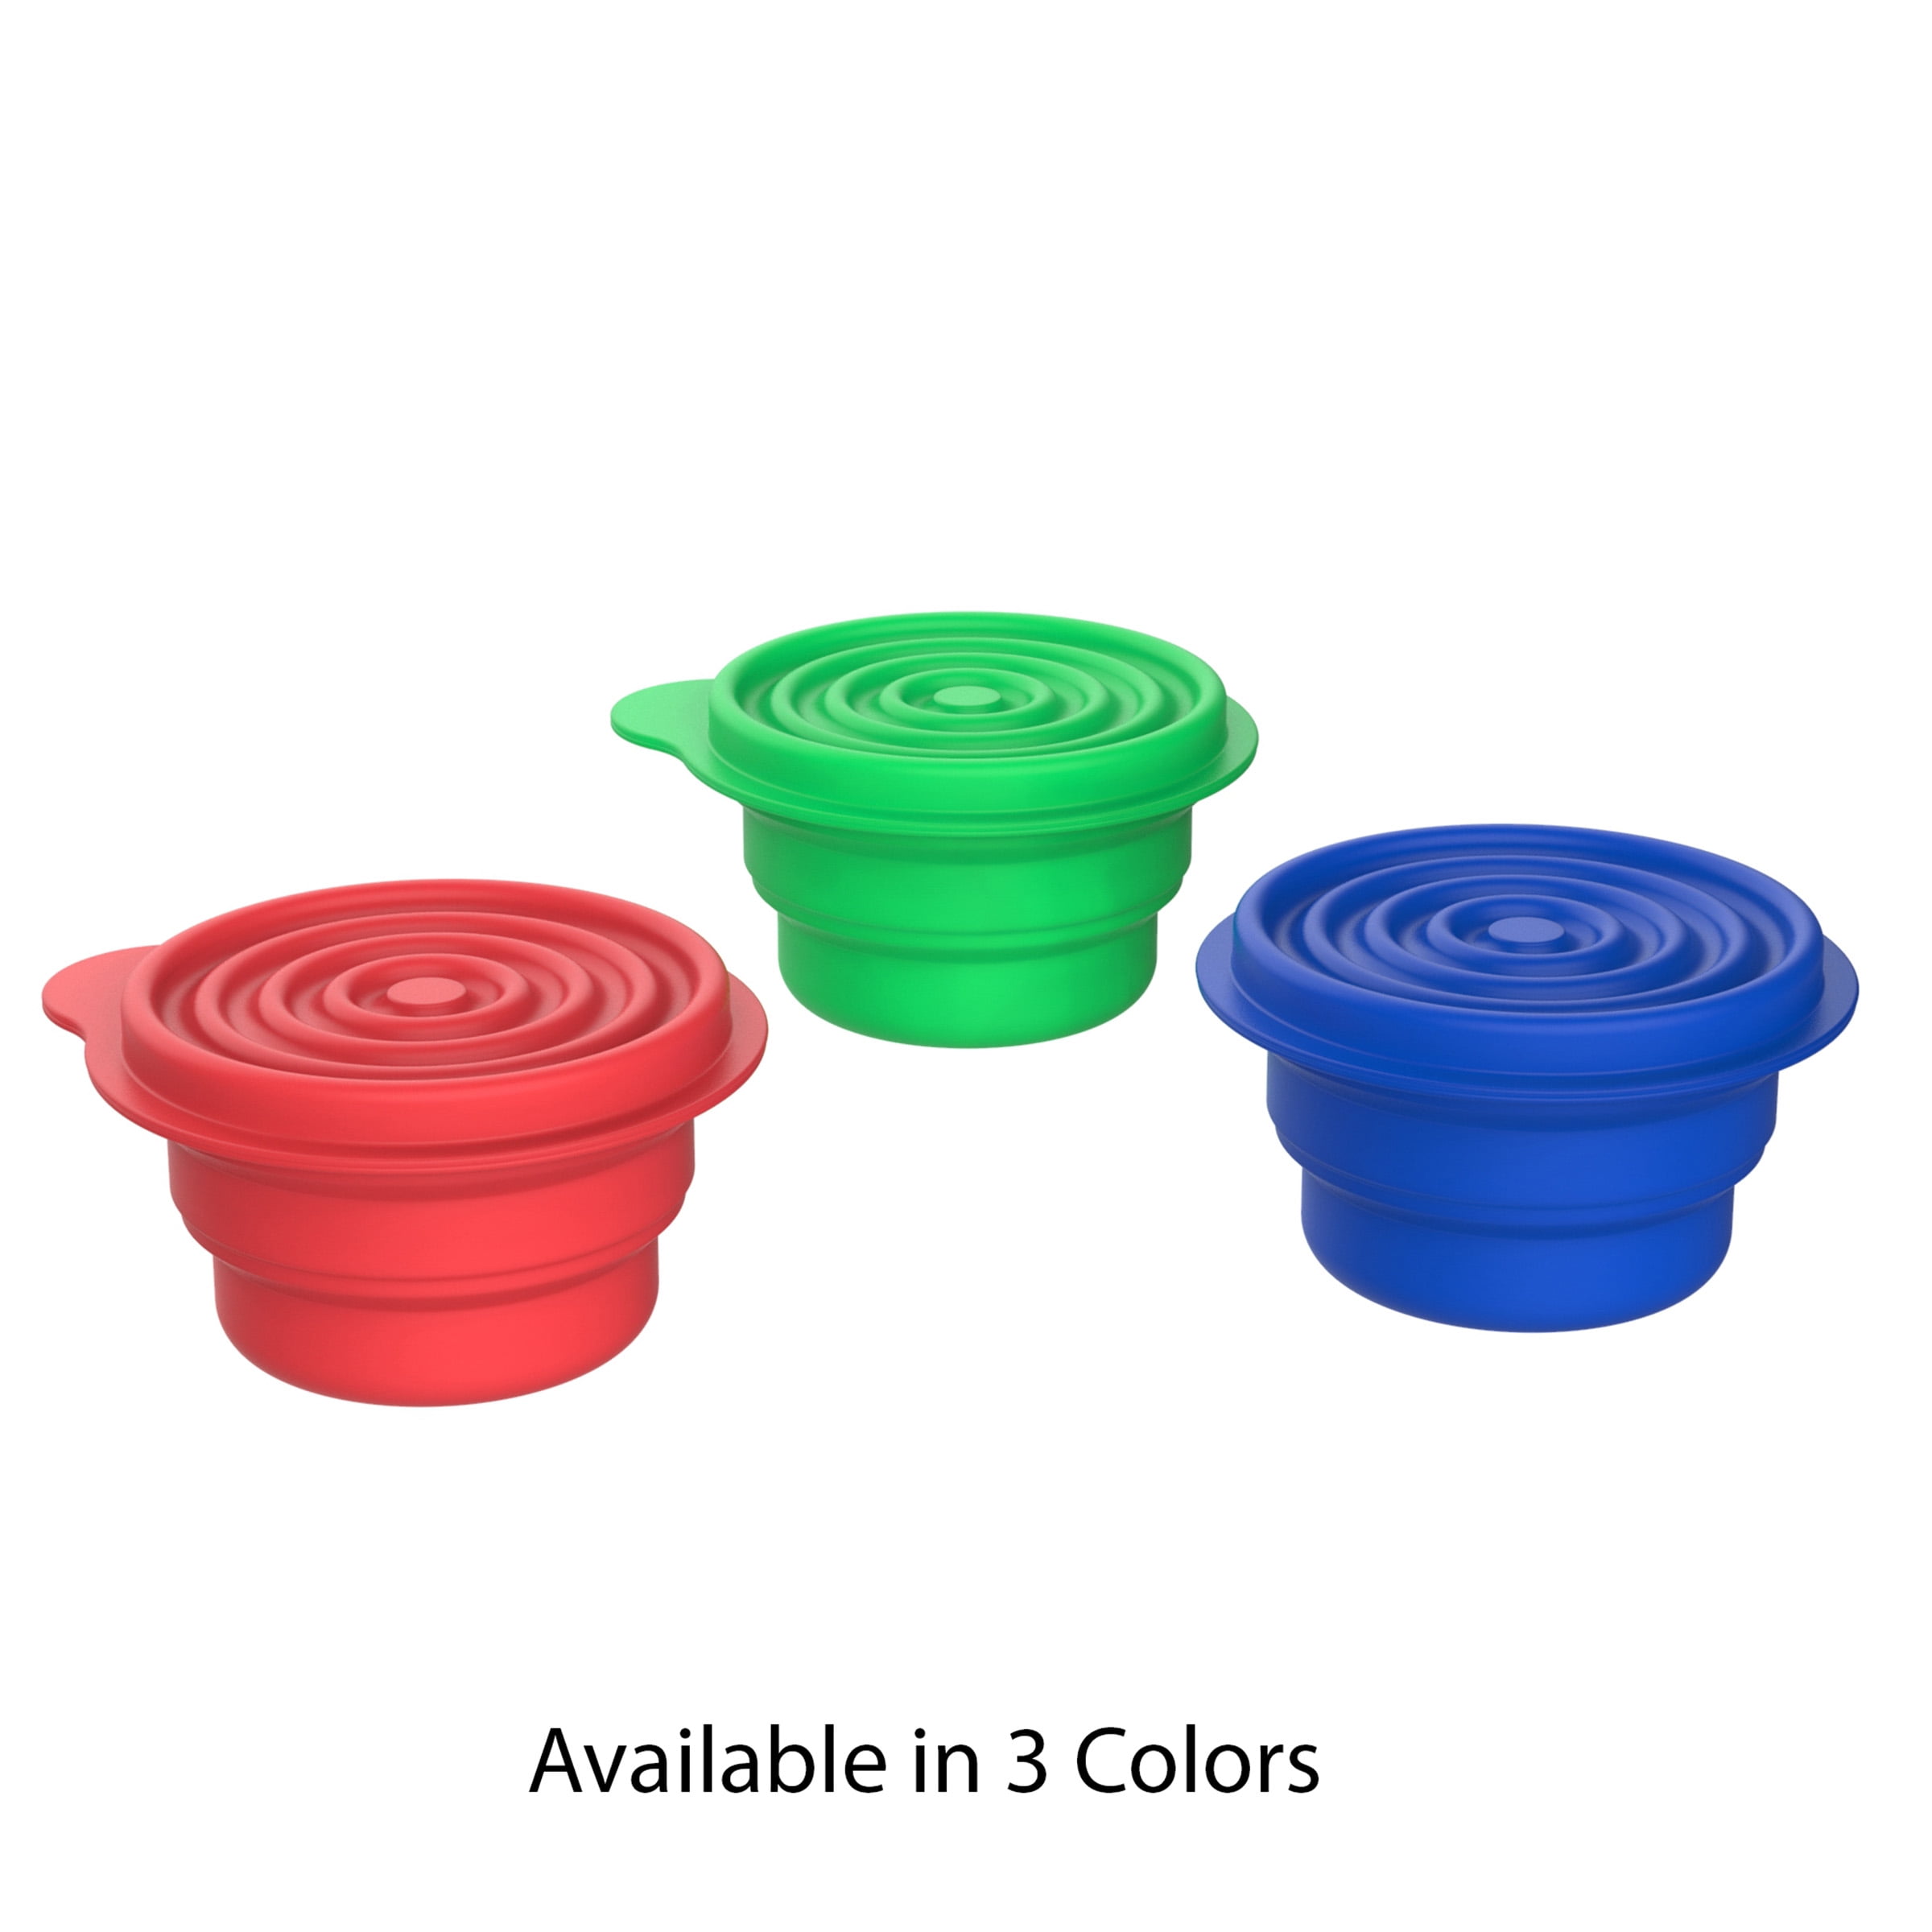 2pcs Silicone Bowls with Lids Set, Reusable Food Container with Airtight Lids, BPA Free Microwave Safe Silicone Bowls for Travel Camping Fridge Food